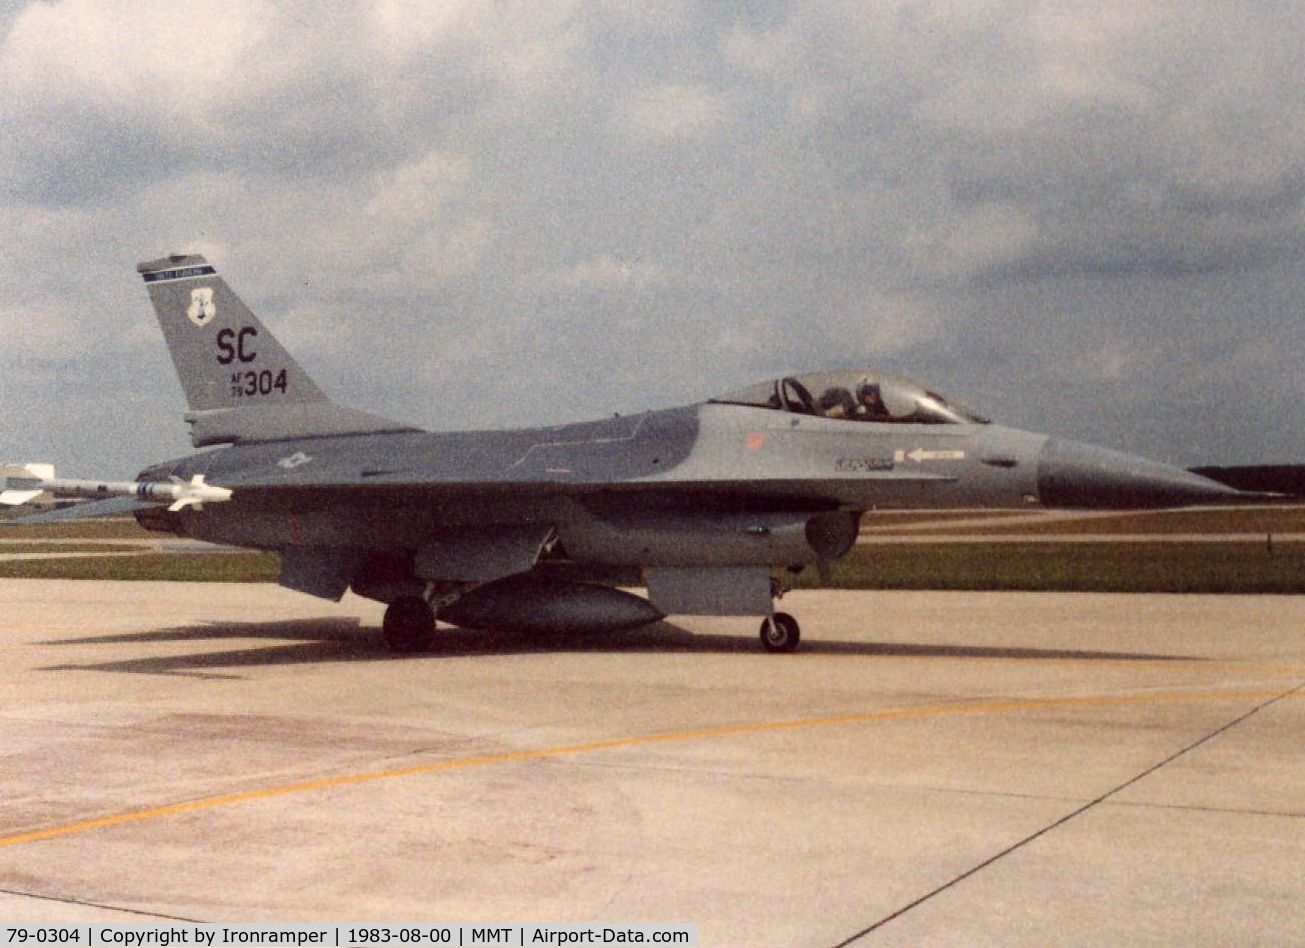 79-0304, 1979 General Dynamics F-16A Fighting Falcon C/N 61-89, One of the first F-16's assigned to the ANG. SCANG's 169th Tac Ftr Gp/157th Tac Ftr Sqdn. Crew Chief MSgt Fred Deshong.